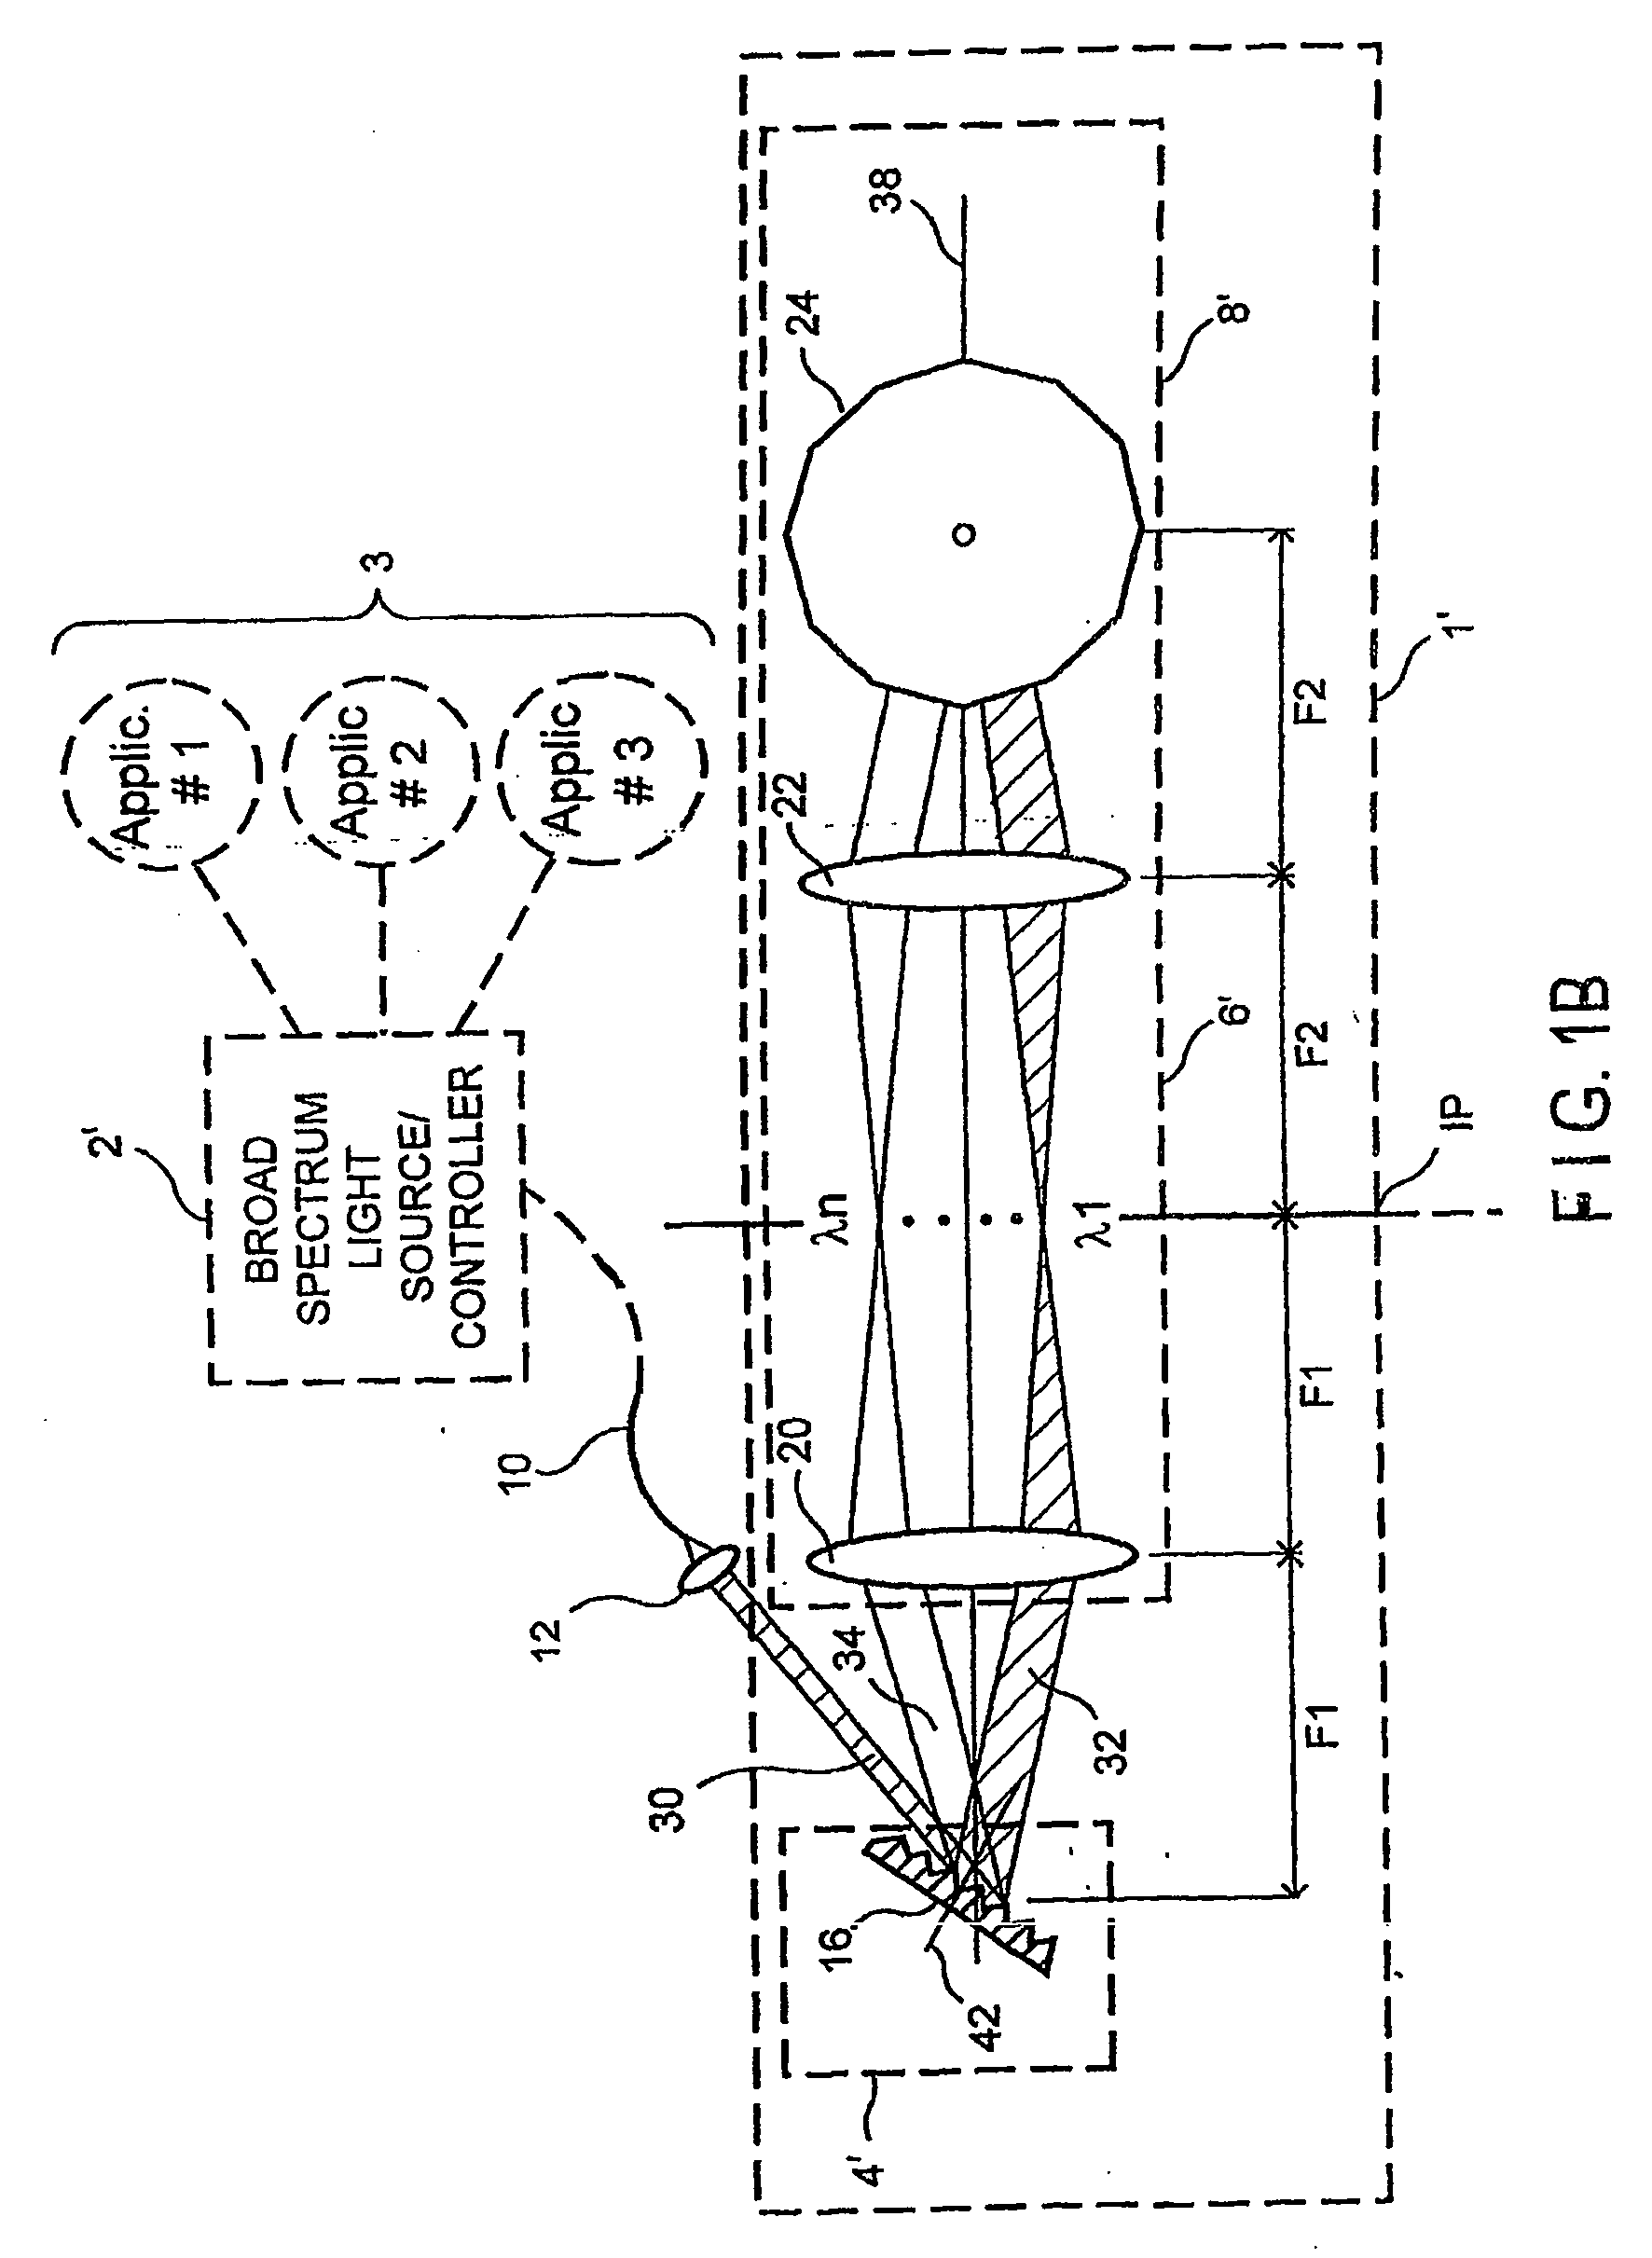 Process and apparatus for a wavelength tuning source